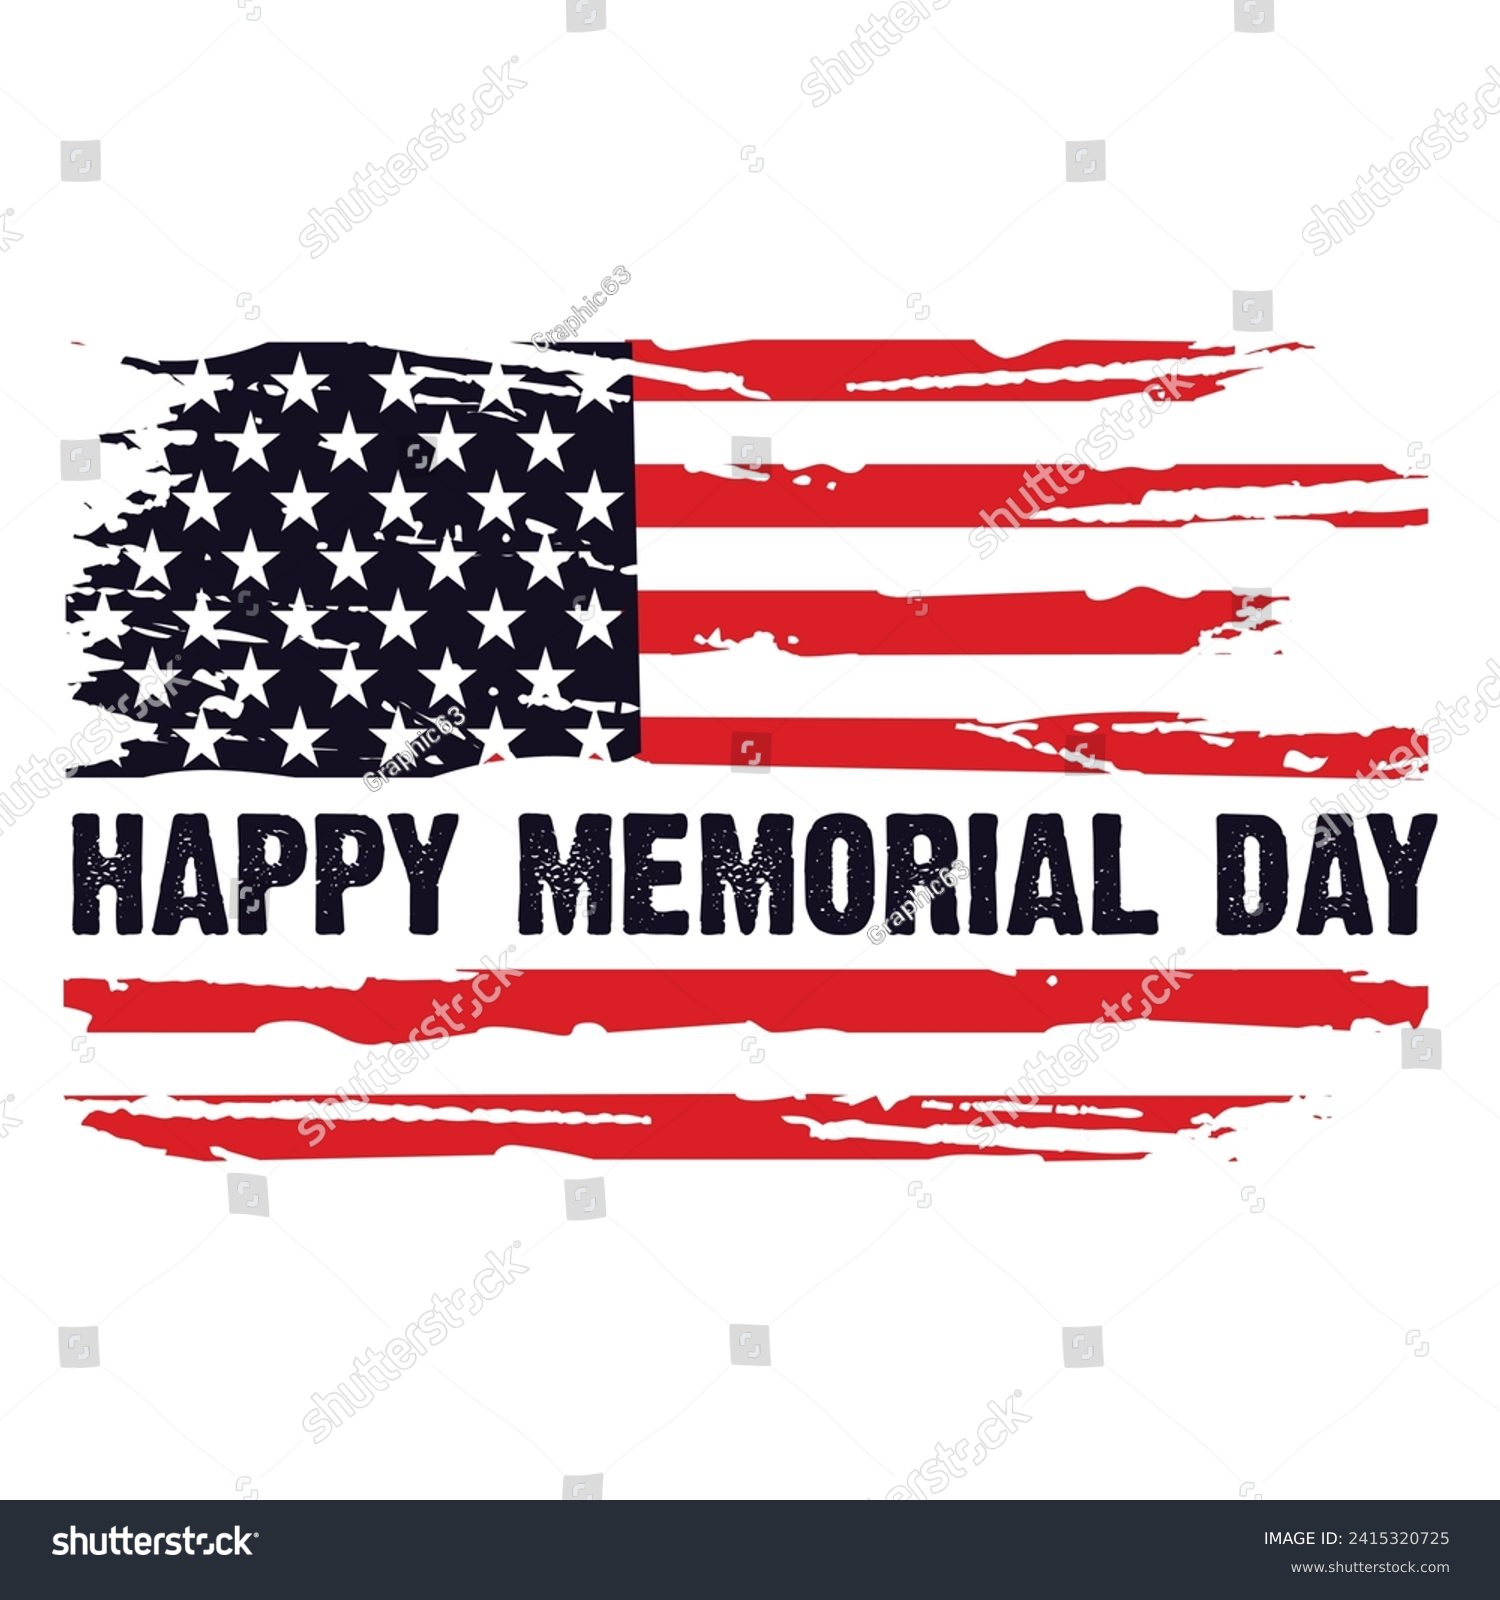 SVG of Distressed Happy Memorial Day American Usa Flag New Design For T Shirt Poster Banner Backround Print Vector Eps Illustrations. svg